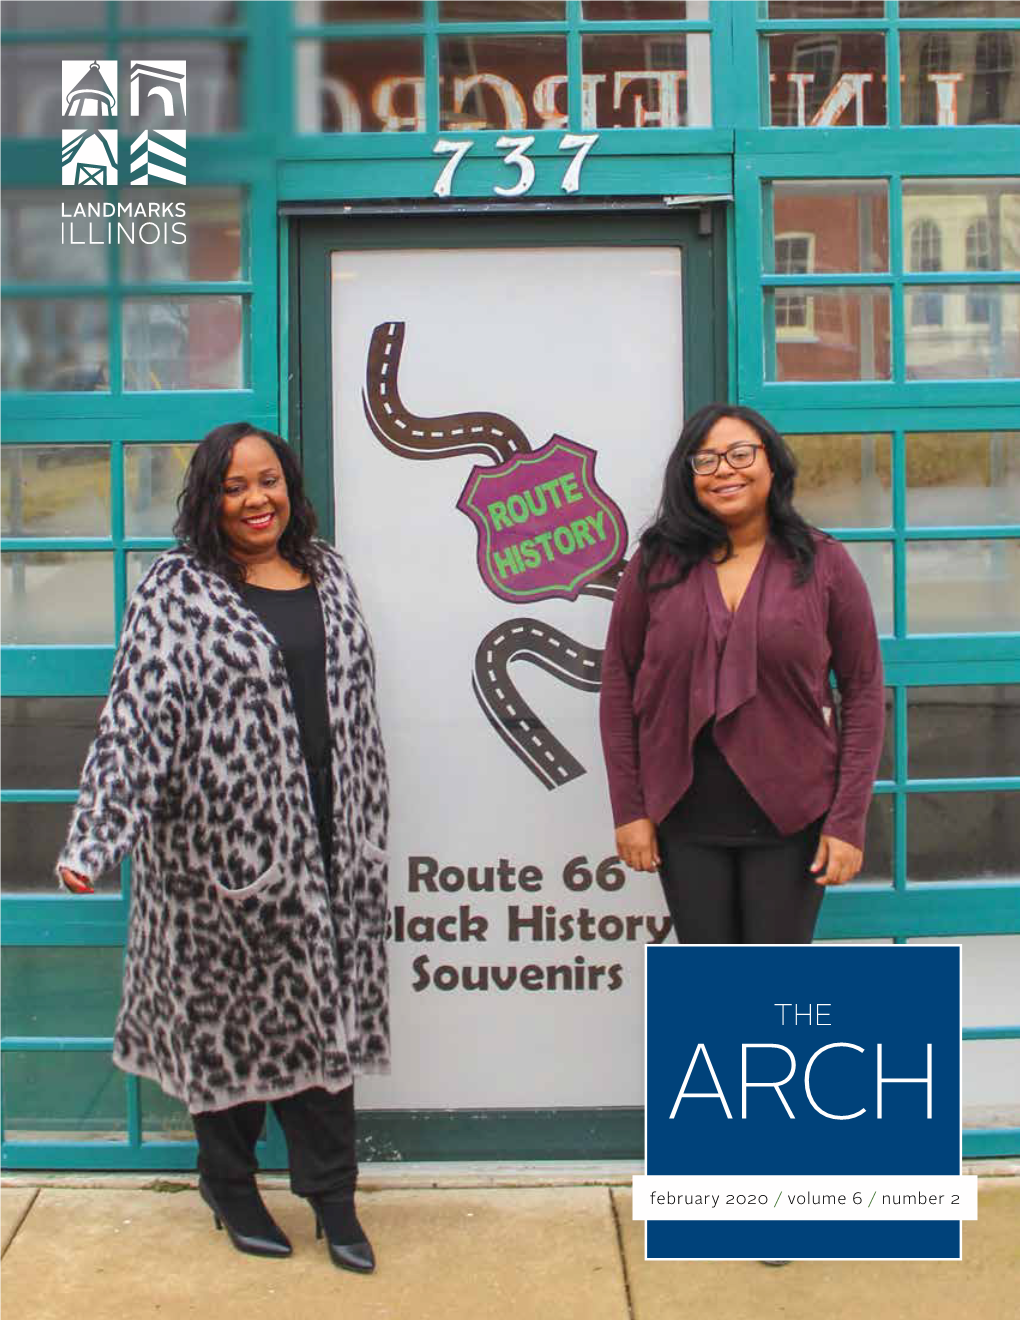 February 2020 Edition of the Arch